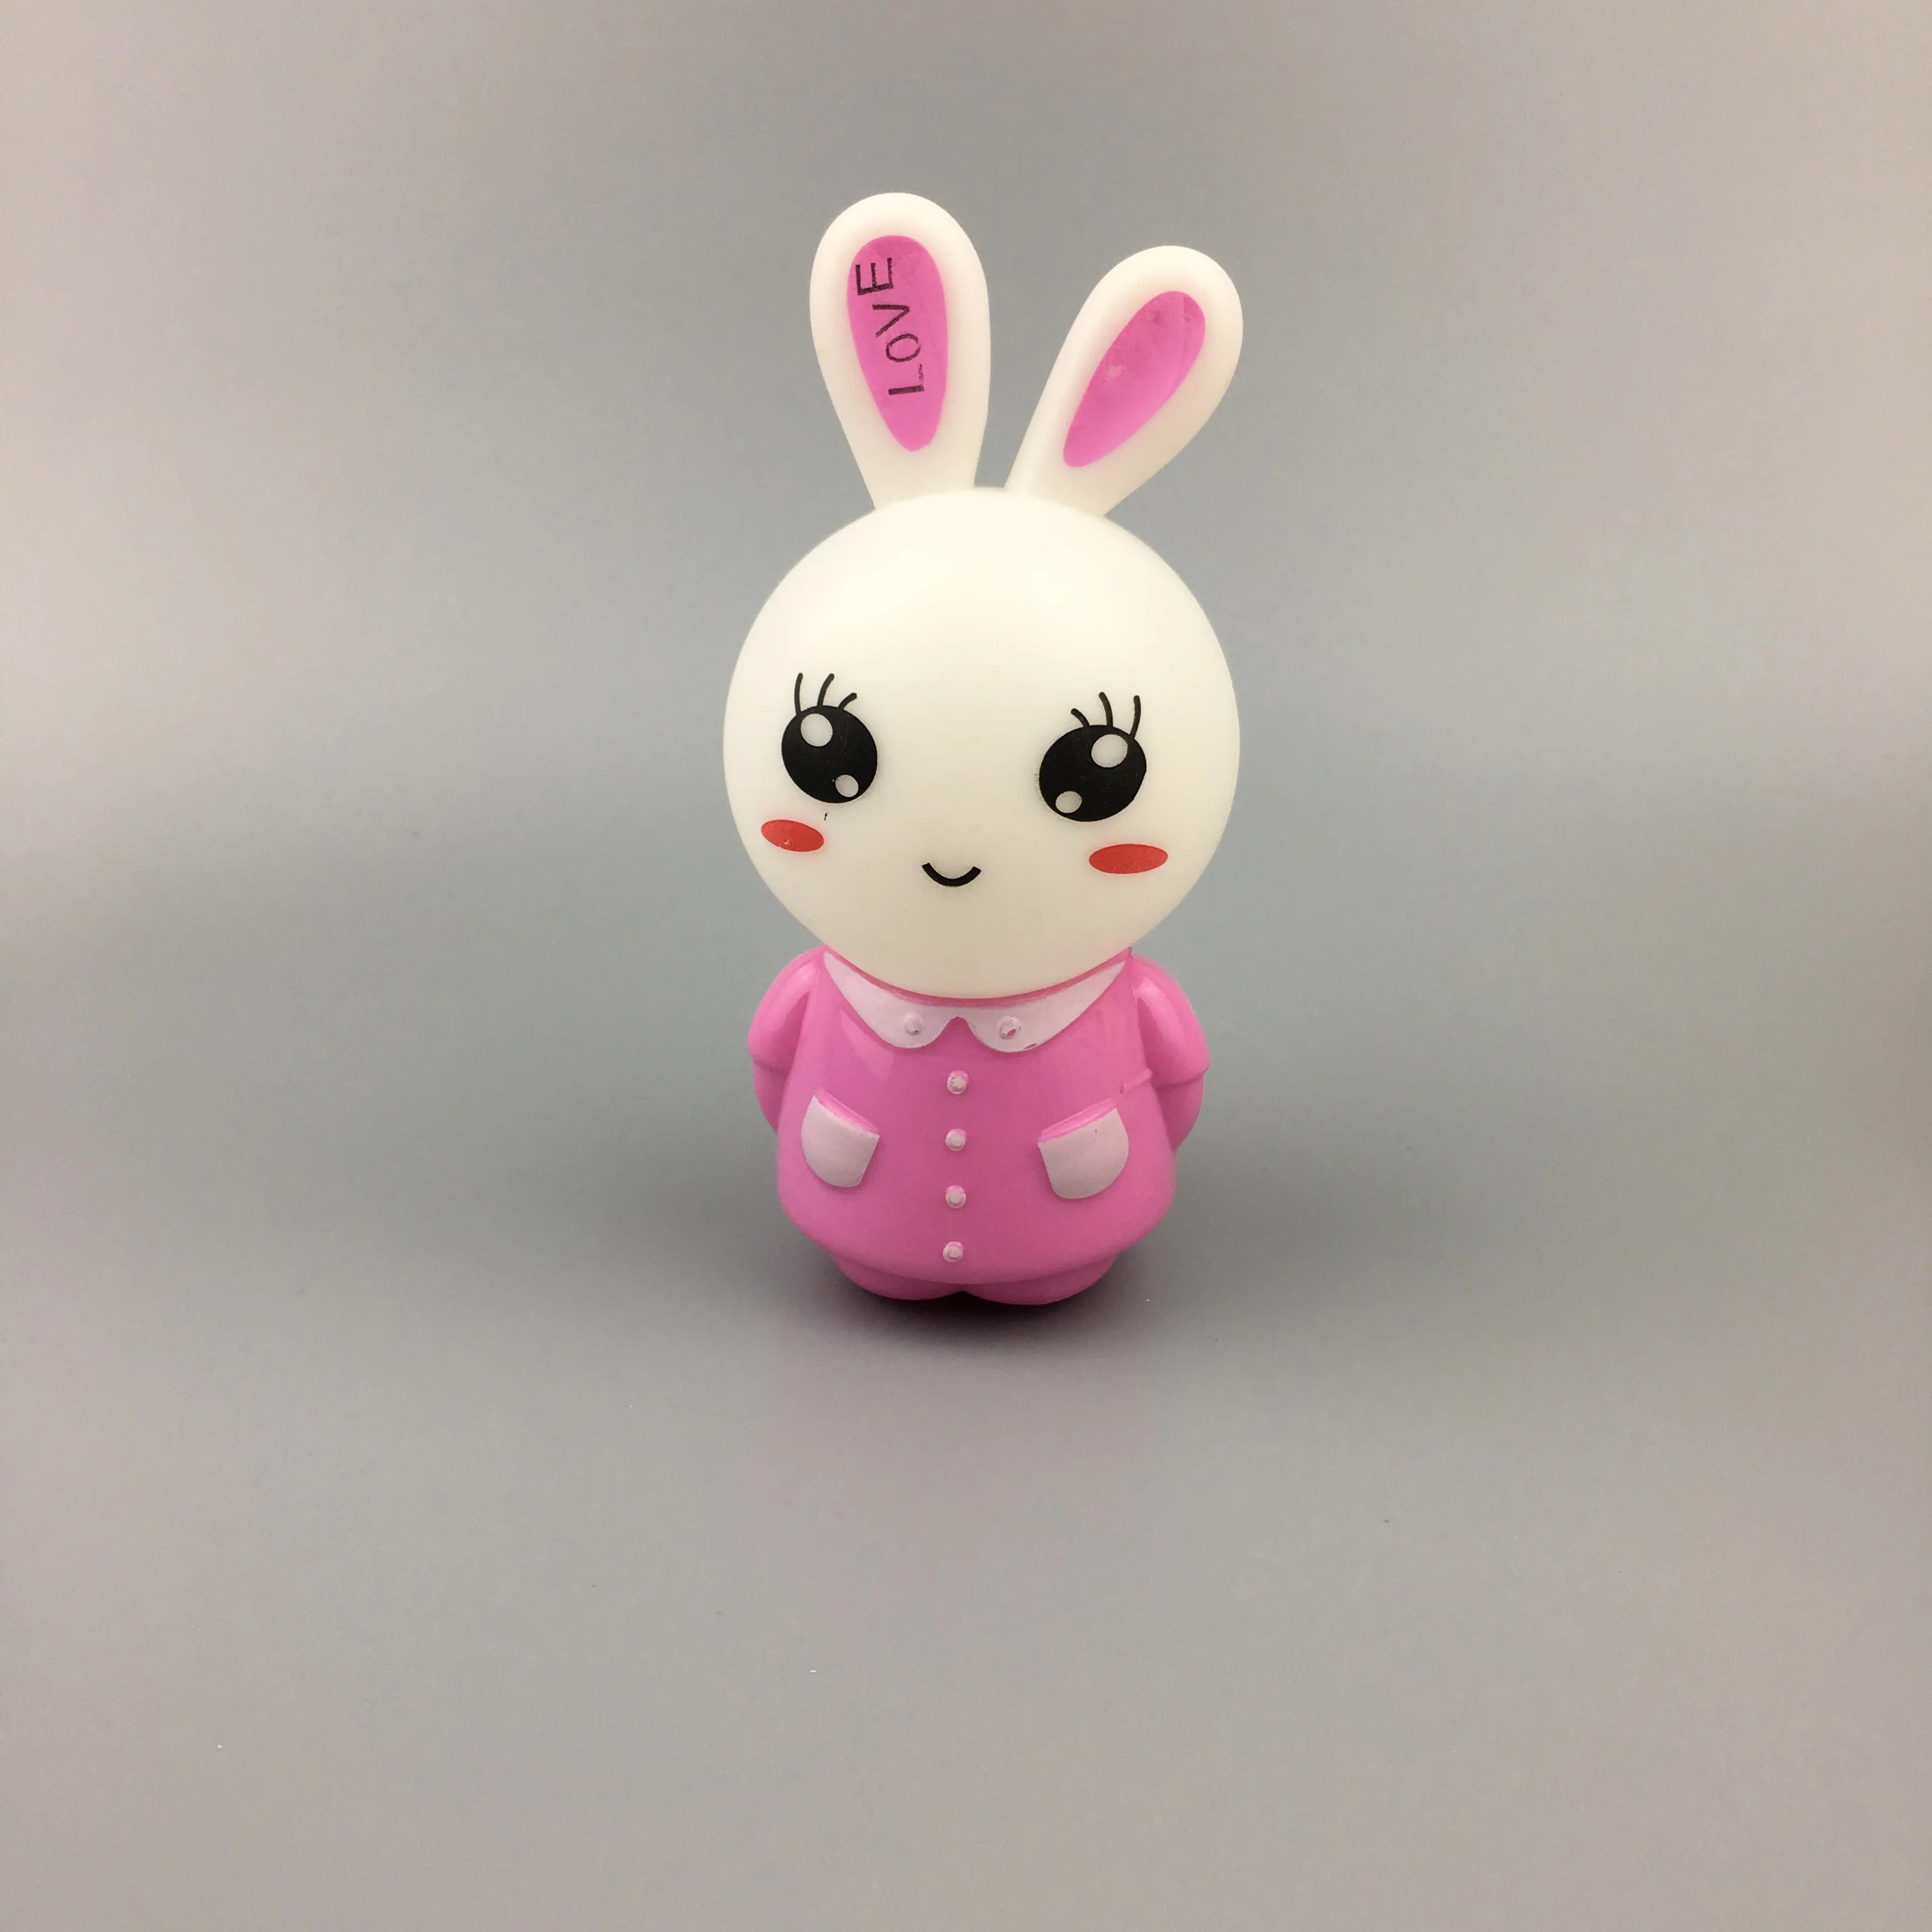 W104 US mini dressed long-eared rabbit switch plug in led night light For Baby Bedroom